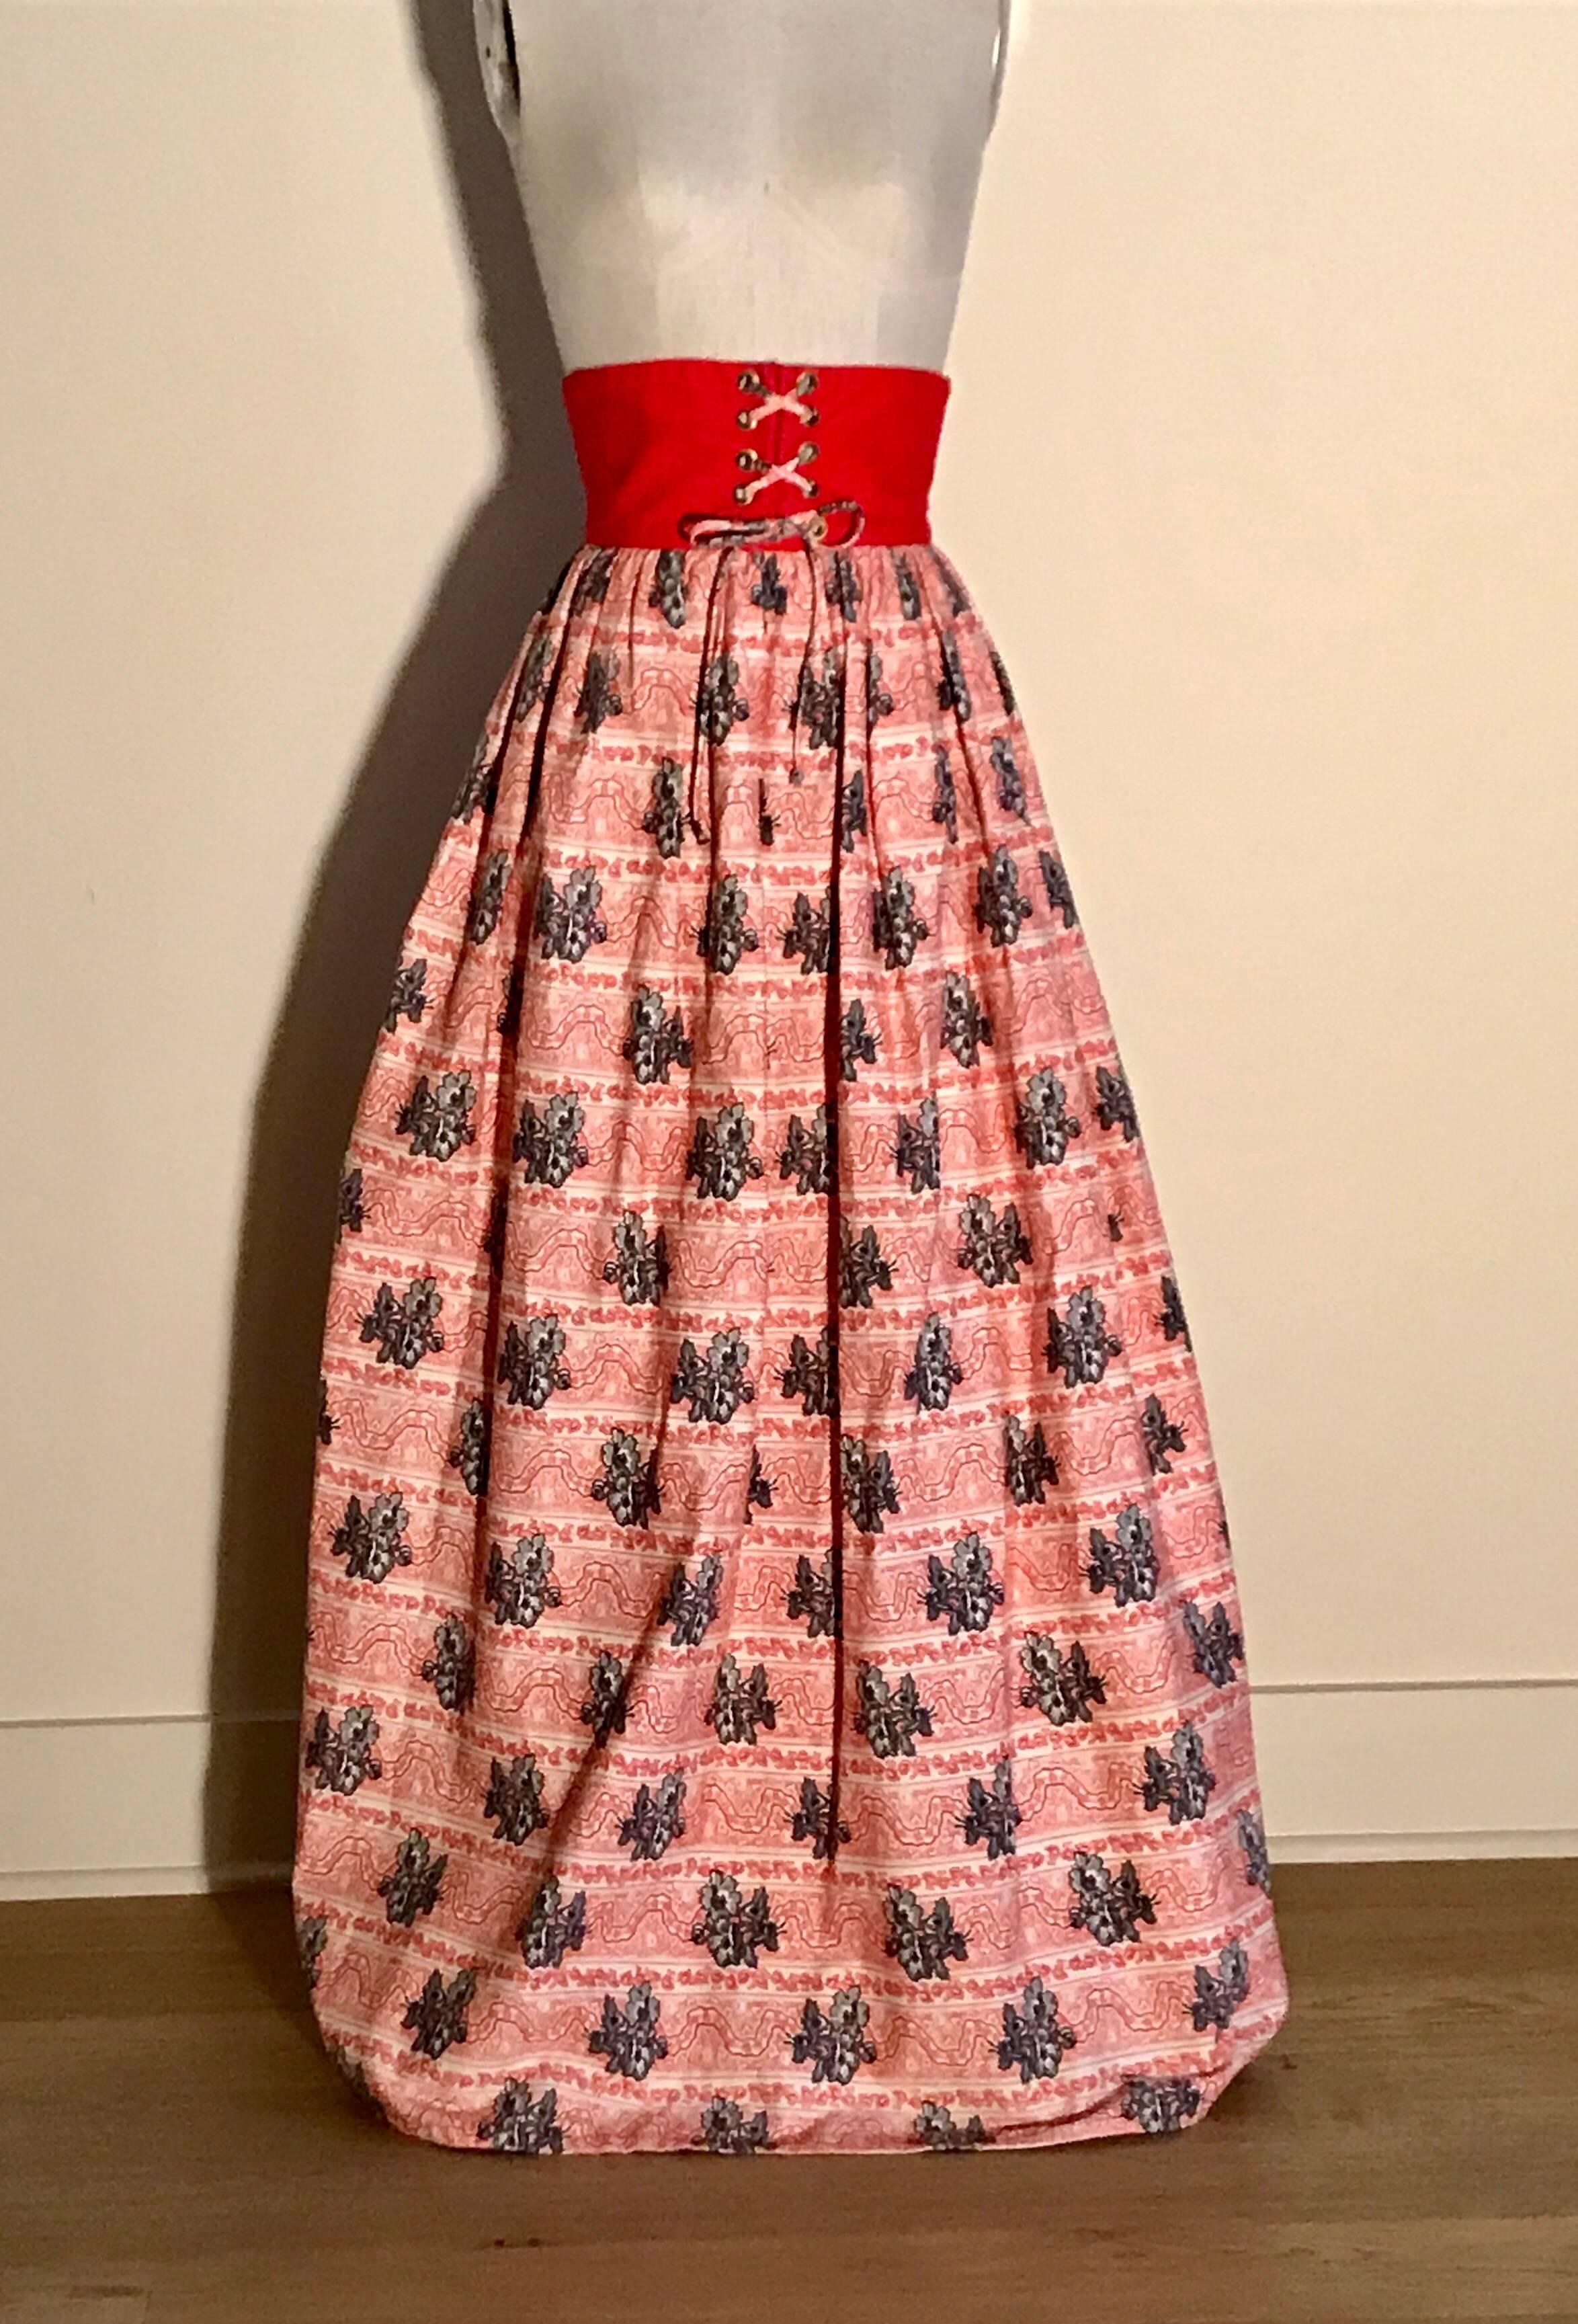 Vintage 1960s style Bohemian full length skirt (actual decade unknown.) Red, white, and black full maxi skirt in a striped floral print with grommeted lace up detail at front center waist and three red buttons at back waist. Center back zip. 

No